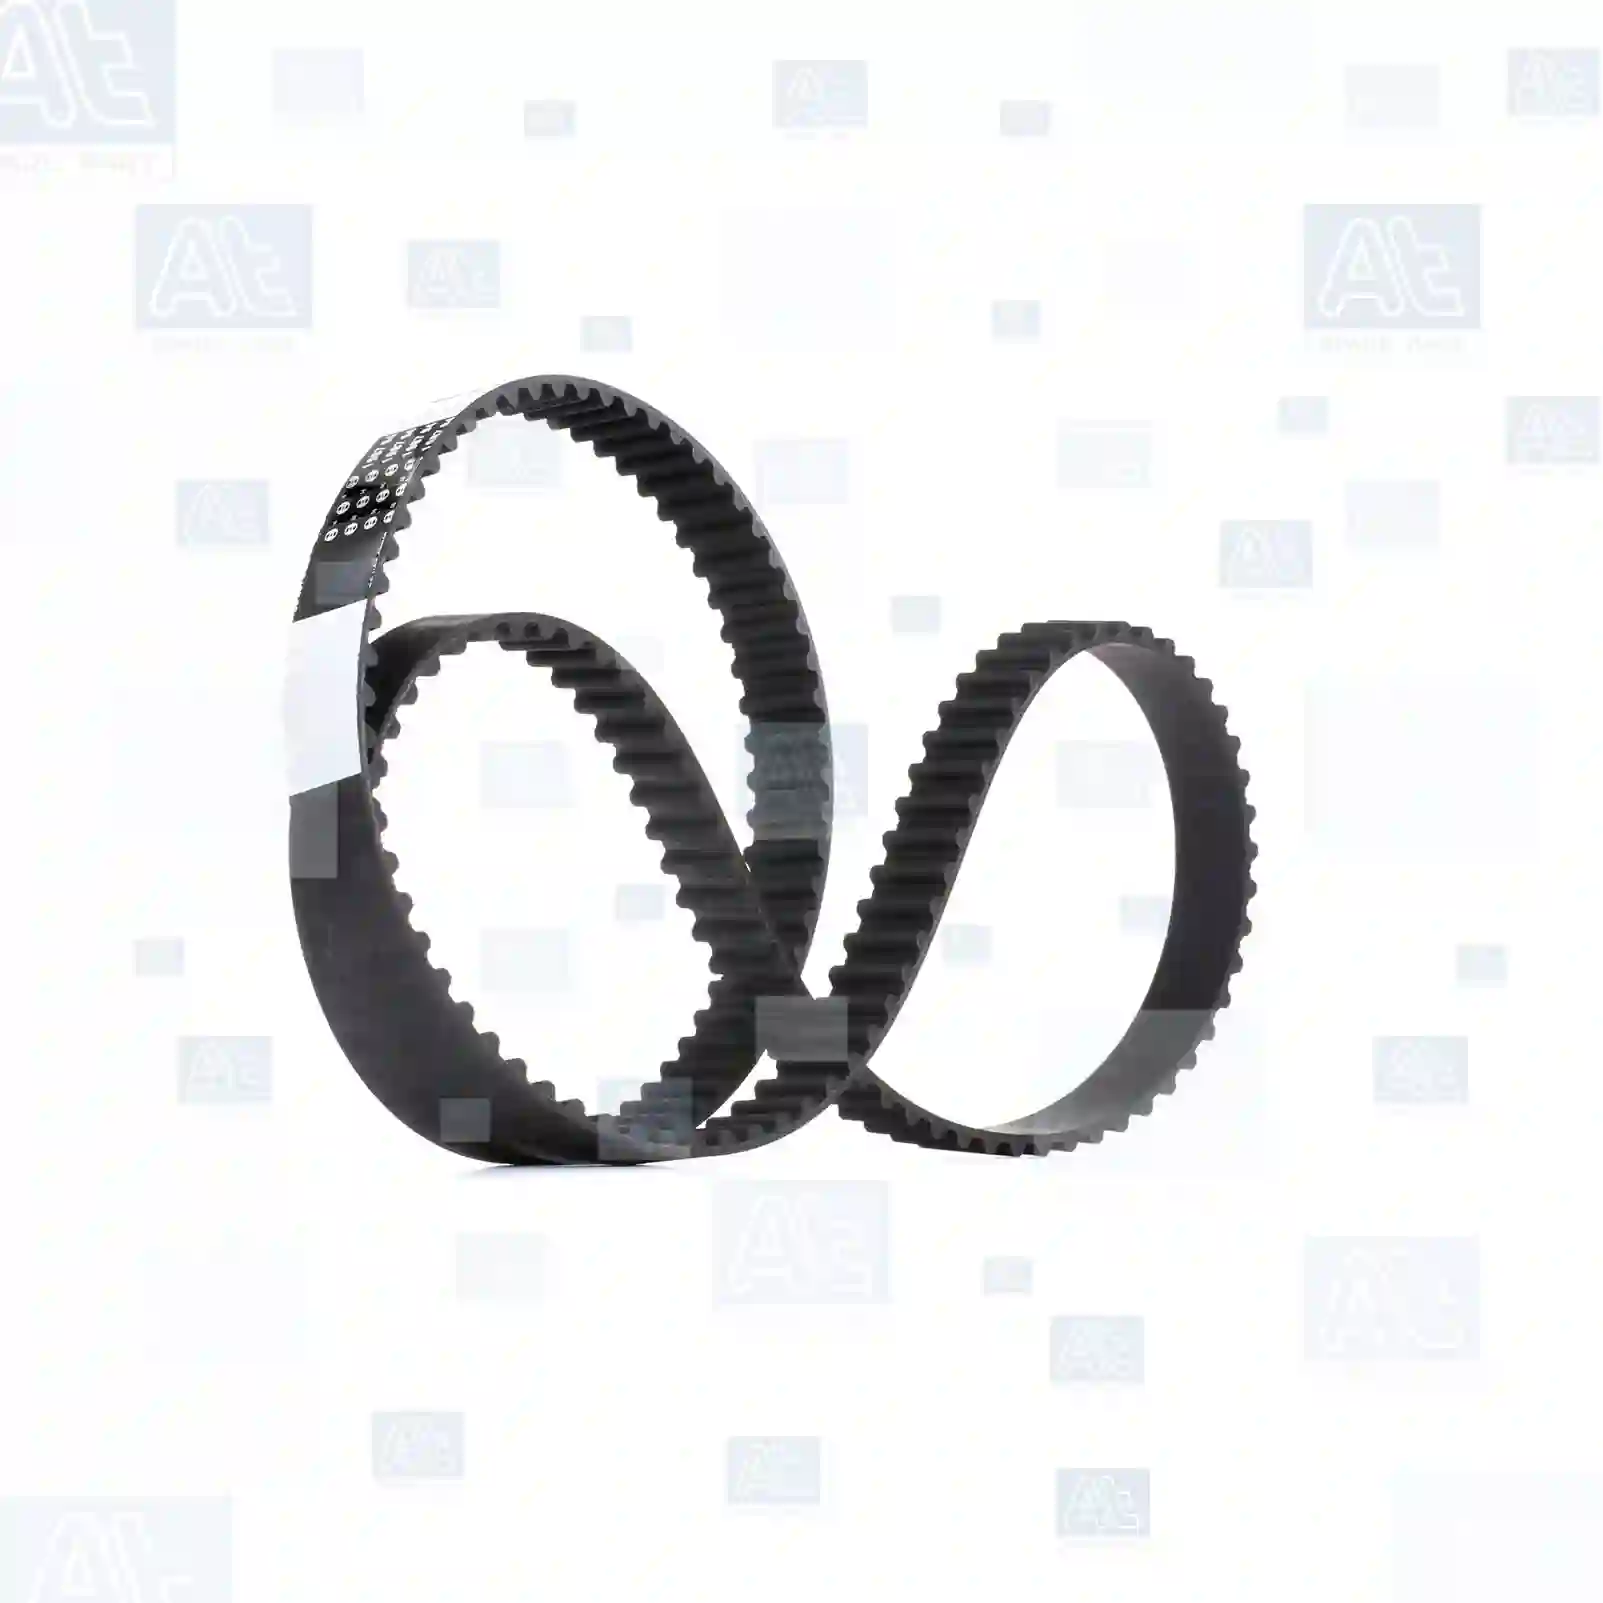 V-belt, at no 77709087, oem no: 195510510308, 60513447, 60704054, 026260849, 026260849A, 050260849, 075145271, ERC4272, ETC4272, 0921232003, 0921233003, 23223003, 921232003, 921233003, 00012686954, 00017068264, 00017110584, 1268695, 1276093, 1315082, 1354948, 1706826, 1711056, 1711058, 12311268690, 64521268695, 64521276093, 64521277426, 64521289592, 64521315082, 64521354948, 64521706626, 64521706826, 64521711056, 9058107902000, 9085107900000, 9933200805, 07629316, 60704054, 38920-671-003, 8-98107797-0, 99454342, C32690, 07629316, ETC4272, 06580412213, 898418381, F85118381A, 007753012555, 0099973792, ERC4272, ETC4272, MB332253, MB553430, MD185960, ME909202, ERC4272, ETC4272, 01978-10774, 02117-79523, 02117-80523, 02117-80528, 11720-16A01, 11720-16A10, 11720-25A00, 11920-01M01, 11920-01M10, 11920-46L00, 11920-H8900, 11920-H9100, 11920-H9101, 11920-H9910, 11920-H9915, 11920-M6600, 11950-W4410, 20166-29W11, 21066-29W10, 21066-29W11, 21140-90505, 7074658, 7080860, 0921232003, ERC4272, ETC4272, 4766699100, 90861-07700, 14625J, 90916-02113, 99332-00805, 99522-10780, 99522-10784, 99522-10800, ERC4272, ETC4272, 026260849, 026260849A, 050260849, 075145271 At Spare Part | Engine, Accelerator Pedal, Camshaft, Connecting Rod, Crankcase, Crankshaft, Cylinder Head, Engine Suspension Mountings, Exhaust Manifold, Exhaust Gas Recirculation, Filter Kits, Flywheel Housing, General Overhaul Kits, Engine, Intake Manifold, Oil Cleaner, Oil Cooler, Oil Filter, Oil Pump, Oil Sump, Piston & Liner, Sensor & Switch, Timing Case, Turbocharger, Cooling System, Belt Tensioner, Coolant Filter, Coolant Pipe, Corrosion Prevention Agent, Drive, Expansion Tank, Fan, Intercooler, Monitors & Gauges, Radiator, Thermostat, V-Belt / Timing belt, Water Pump, Fuel System, Electronical Injector Unit, Feed Pump, Fuel Filter, cpl., Fuel Gauge Sender,  Fuel Line, Fuel Pump, Fuel Tank, Injection Line Kit, Injection Pump, Exhaust System, Clutch & Pedal, Gearbox, Propeller Shaft, Axles, Brake System, Hubs & Wheels, Suspension, Leaf Spring, Universal Parts / Accessories, Steering, Electrical System, Cabin V-belt, at no 77709087, oem no: 195510510308, 60513447, 60704054, 026260849, 026260849A, 050260849, 075145271, ERC4272, ETC4272, 0921232003, 0921233003, 23223003, 921232003, 921233003, 00012686954, 00017068264, 00017110584, 1268695, 1276093, 1315082, 1354948, 1706826, 1711056, 1711058, 12311268690, 64521268695, 64521276093, 64521277426, 64521289592, 64521315082, 64521354948, 64521706626, 64521706826, 64521711056, 9058107902000, 9085107900000, 9933200805, 07629316, 60704054, 38920-671-003, 8-98107797-0, 99454342, C32690, 07629316, ETC4272, 06580412213, 898418381, F85118381A, 007753012555, 0099973792, ERC4272, ETC4272, MB332253, MB553430, MD185960, ME909202, ERC4272, ETC4272, 01978-10774, 02117-79523, 02117-80523, 02117-80528, 11720-16A01, 11720-16A10, 11720-25A00, 11920-01M01, 11920-01M10, 11920-46L00, 11920-H8900, 11920-H9100, 11920-H9101, 11920-H9910, 11920-H9915, 11920-M6600, 11950-W4410, 20166-29W11, 21066-29W10, 21066-29W11, 21140-90505, 7074658, 7080860, 0921232003, ERC4272, ETC4272, 4766699100, 90861-07700, 14625J, 90916-02113, 99332-00805, 99522-10780, 99522-10784, 99522-10800, ERC4272, ETC4272, 026260849, 026260849A, 050260849, 075145271 At Spare Part | Engine, Accelerator Pedal, Camshaft, Connecting Rod, Crankcase, Crankshaft, Cylinder Head, Engine Suspension Mountings, Exhaust Manifold, Exhaust Gas Recirculation, Filter Kits, Flywheel Housing, General Overhaul Kits, Engine, Intake Manifold, Oil Cleaner, Oil Cooler, Oil Filter, Oil Pump, Oil Sump, Piston & Liner, Sensor & Switch, Timing Case, Turbocharger, Cooling System, Belt Tensioner, Coolant Filter, Coolant Pipe, Corrosion Prevention Agent, Drive, Expansion Tank, Fan, Intercooler, Monitors & Gauges, Radiator, Thermostat, V-Belt / Timing belt, Water Pump, Fuel System, Electronical Injector Unit, Feed Pump, Fuel Filter, cpl., Fuel Gauge Sender,  Fuel Line, Fuel Pump, Fuel Tank, Injection Line Kit, Injection Pump, Exhaust System, Clutch & Pedal, Gearbox, Propeller Shaft, Axles, Brake System, Hubs & Wheels, Suspension, Leaf Spring, Universal Parts / Accessories, Steering, Electrical System, Cabin